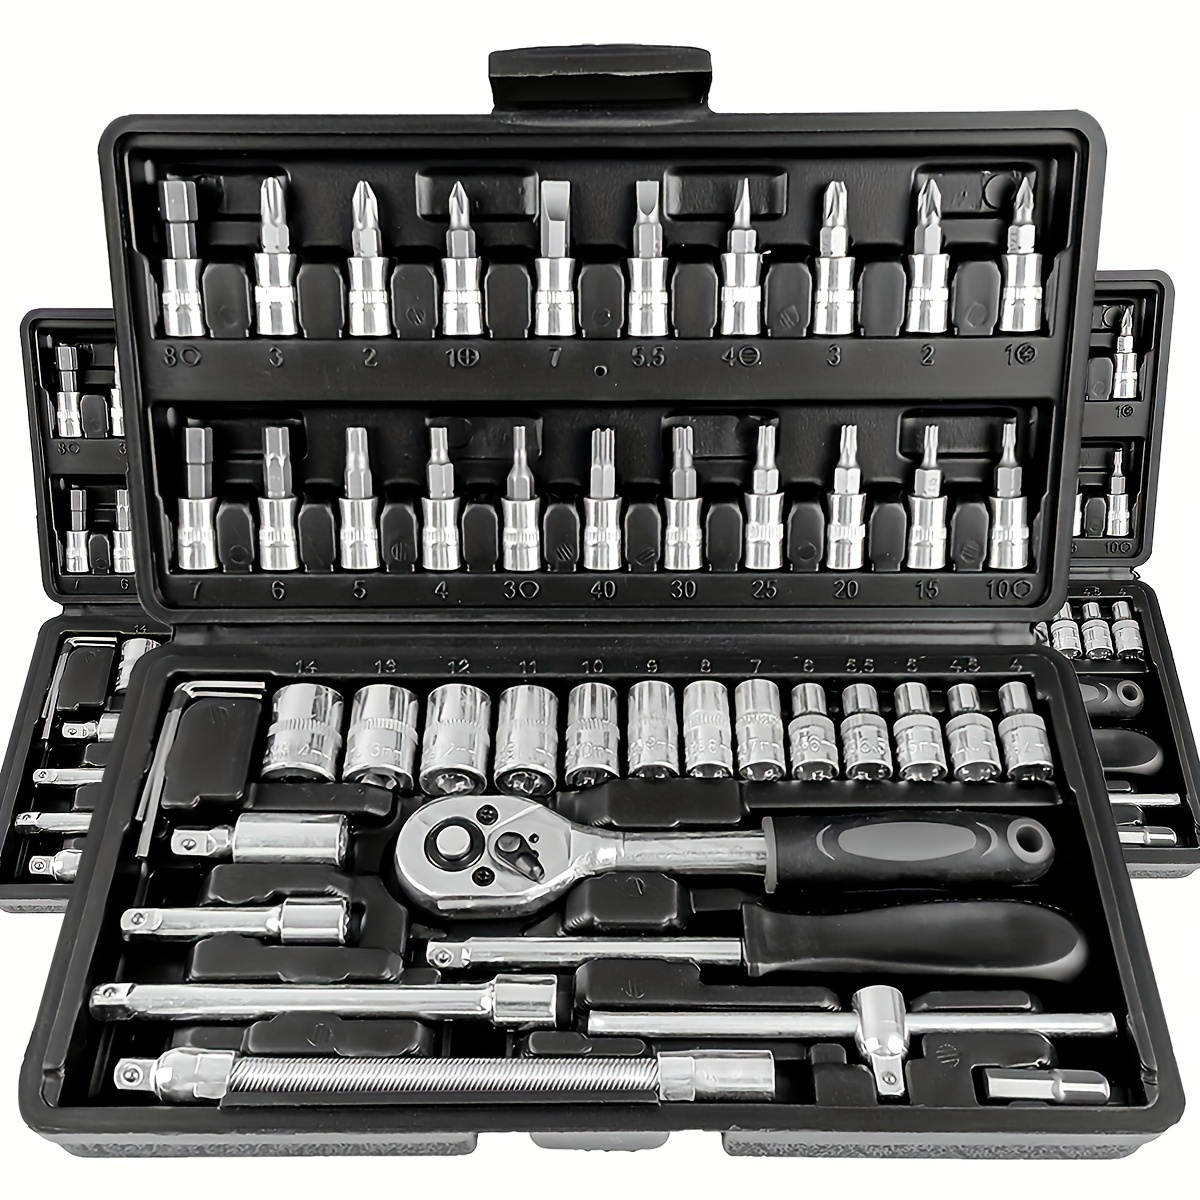 

Expert Grade 46pc & 150pc Ratchet Wrench Sets With Chrome Vanadium Steel Extensions, Durable Socket Bits For Automotive & Home Repair, Includes Premium Storage Case